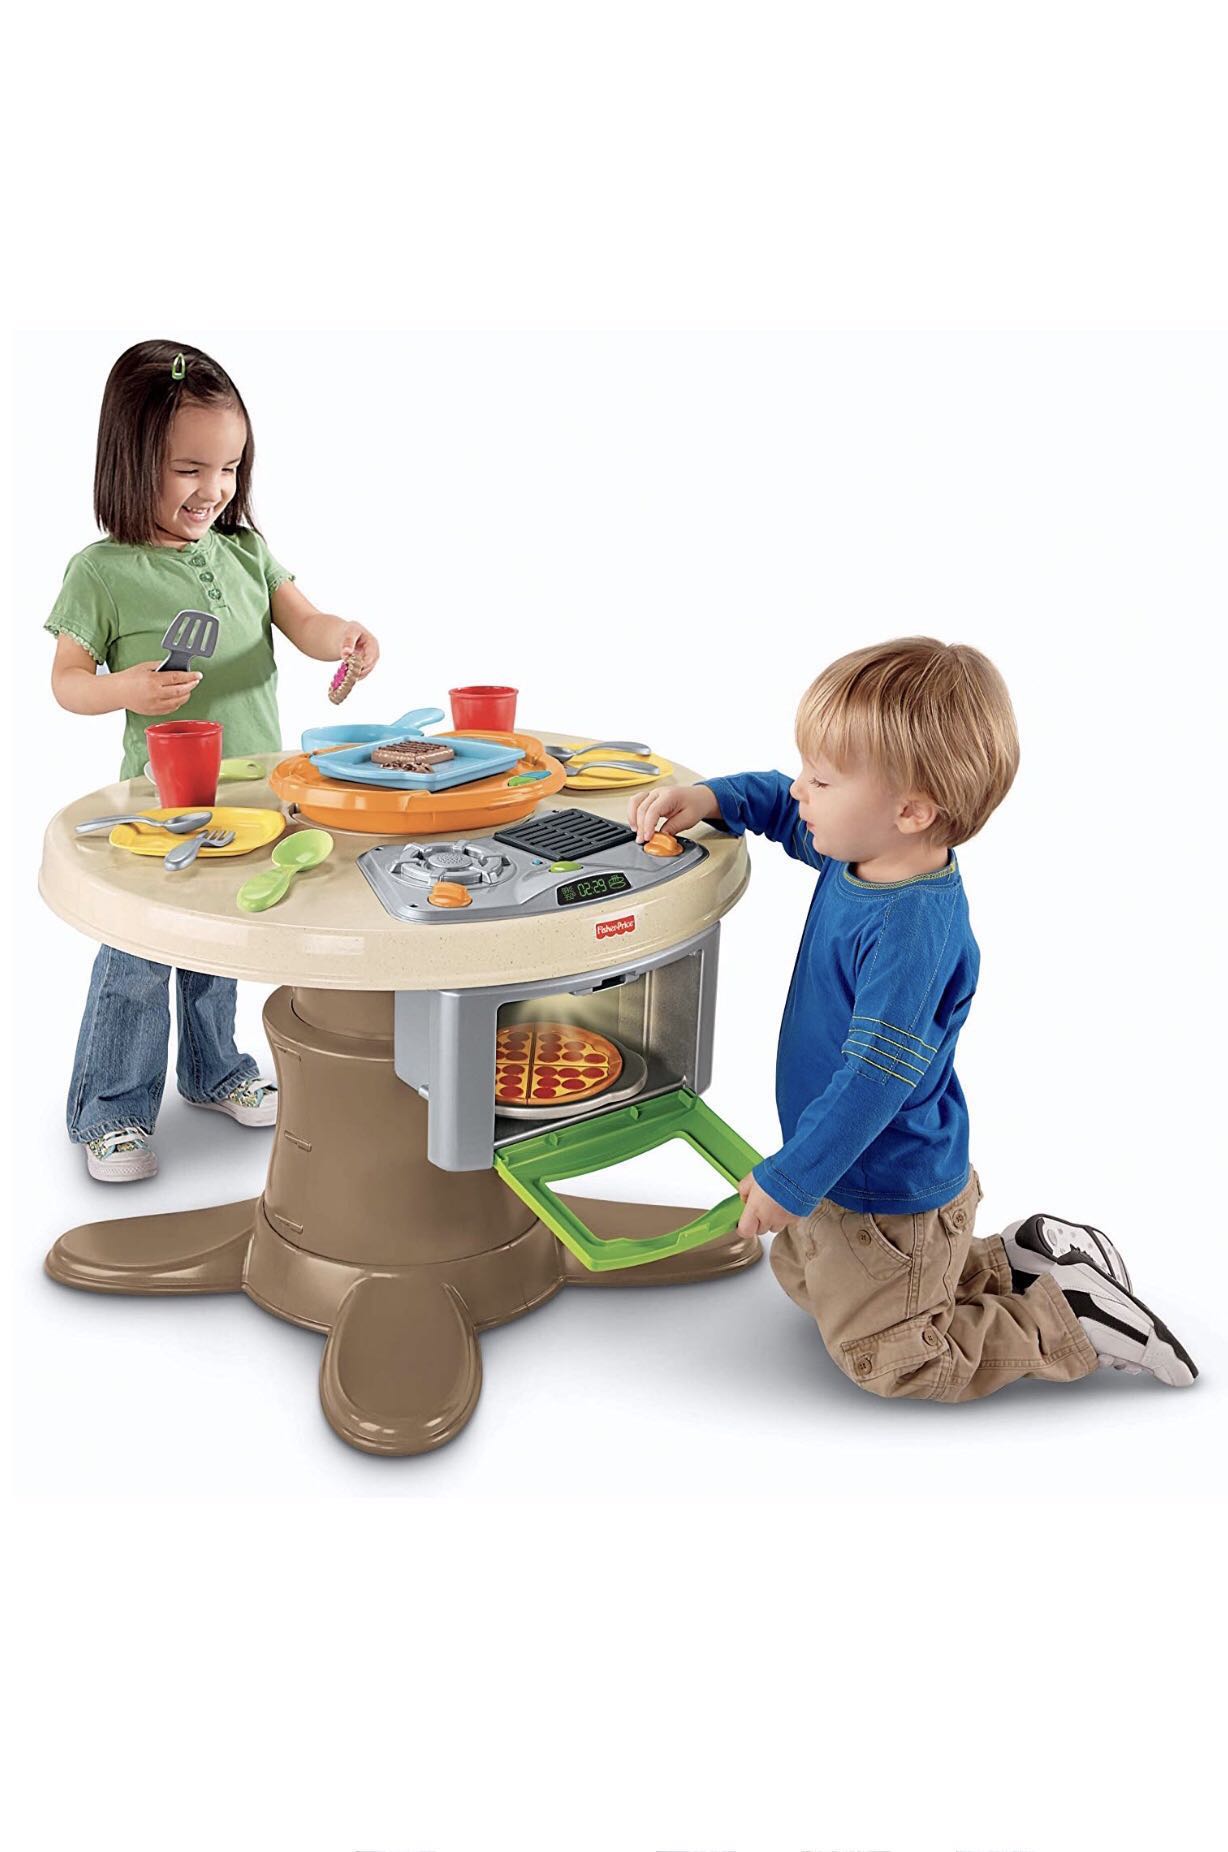 Fisher Price Servings Surprises Table And Kitchen Set 1530159897 Dc6f8626 